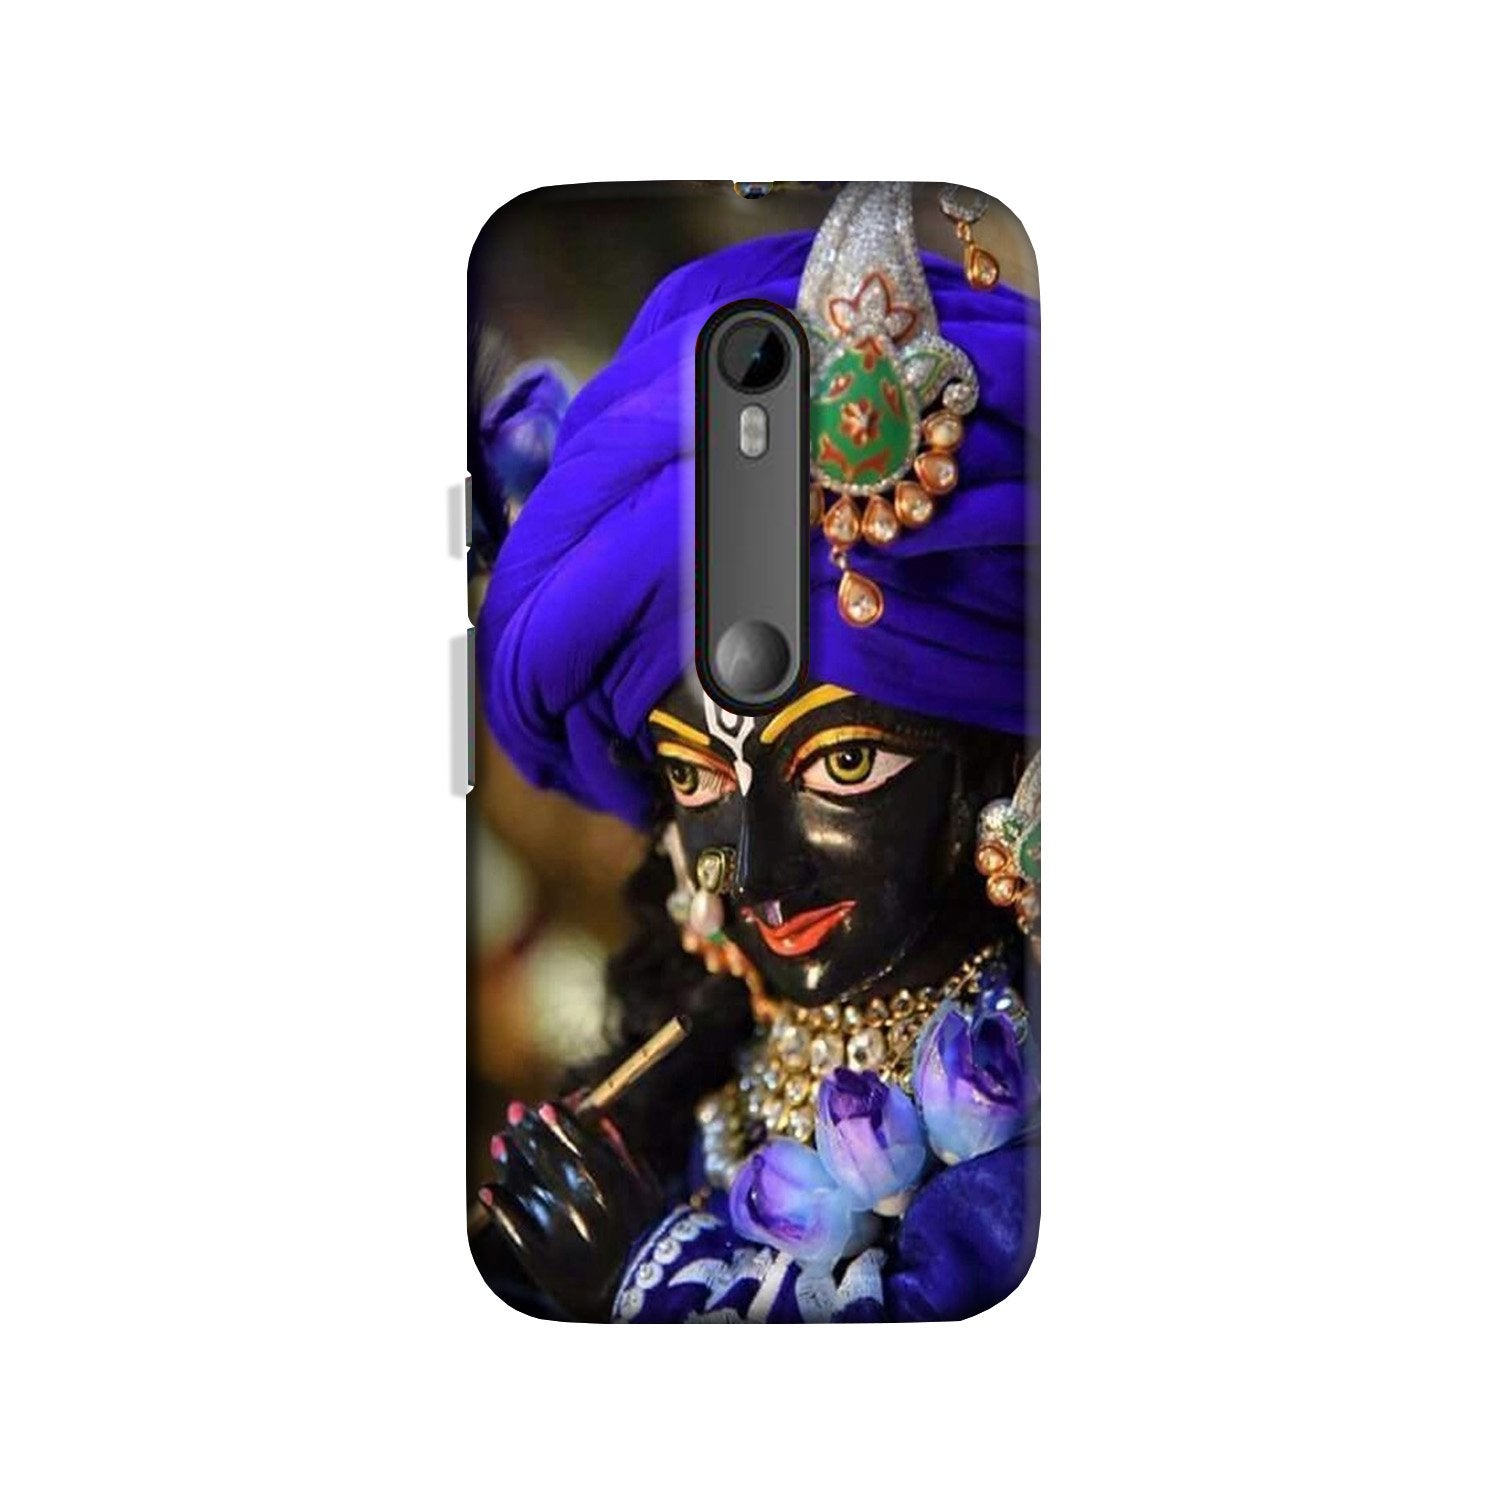 Lord Krishna4 Case for Moto X Play